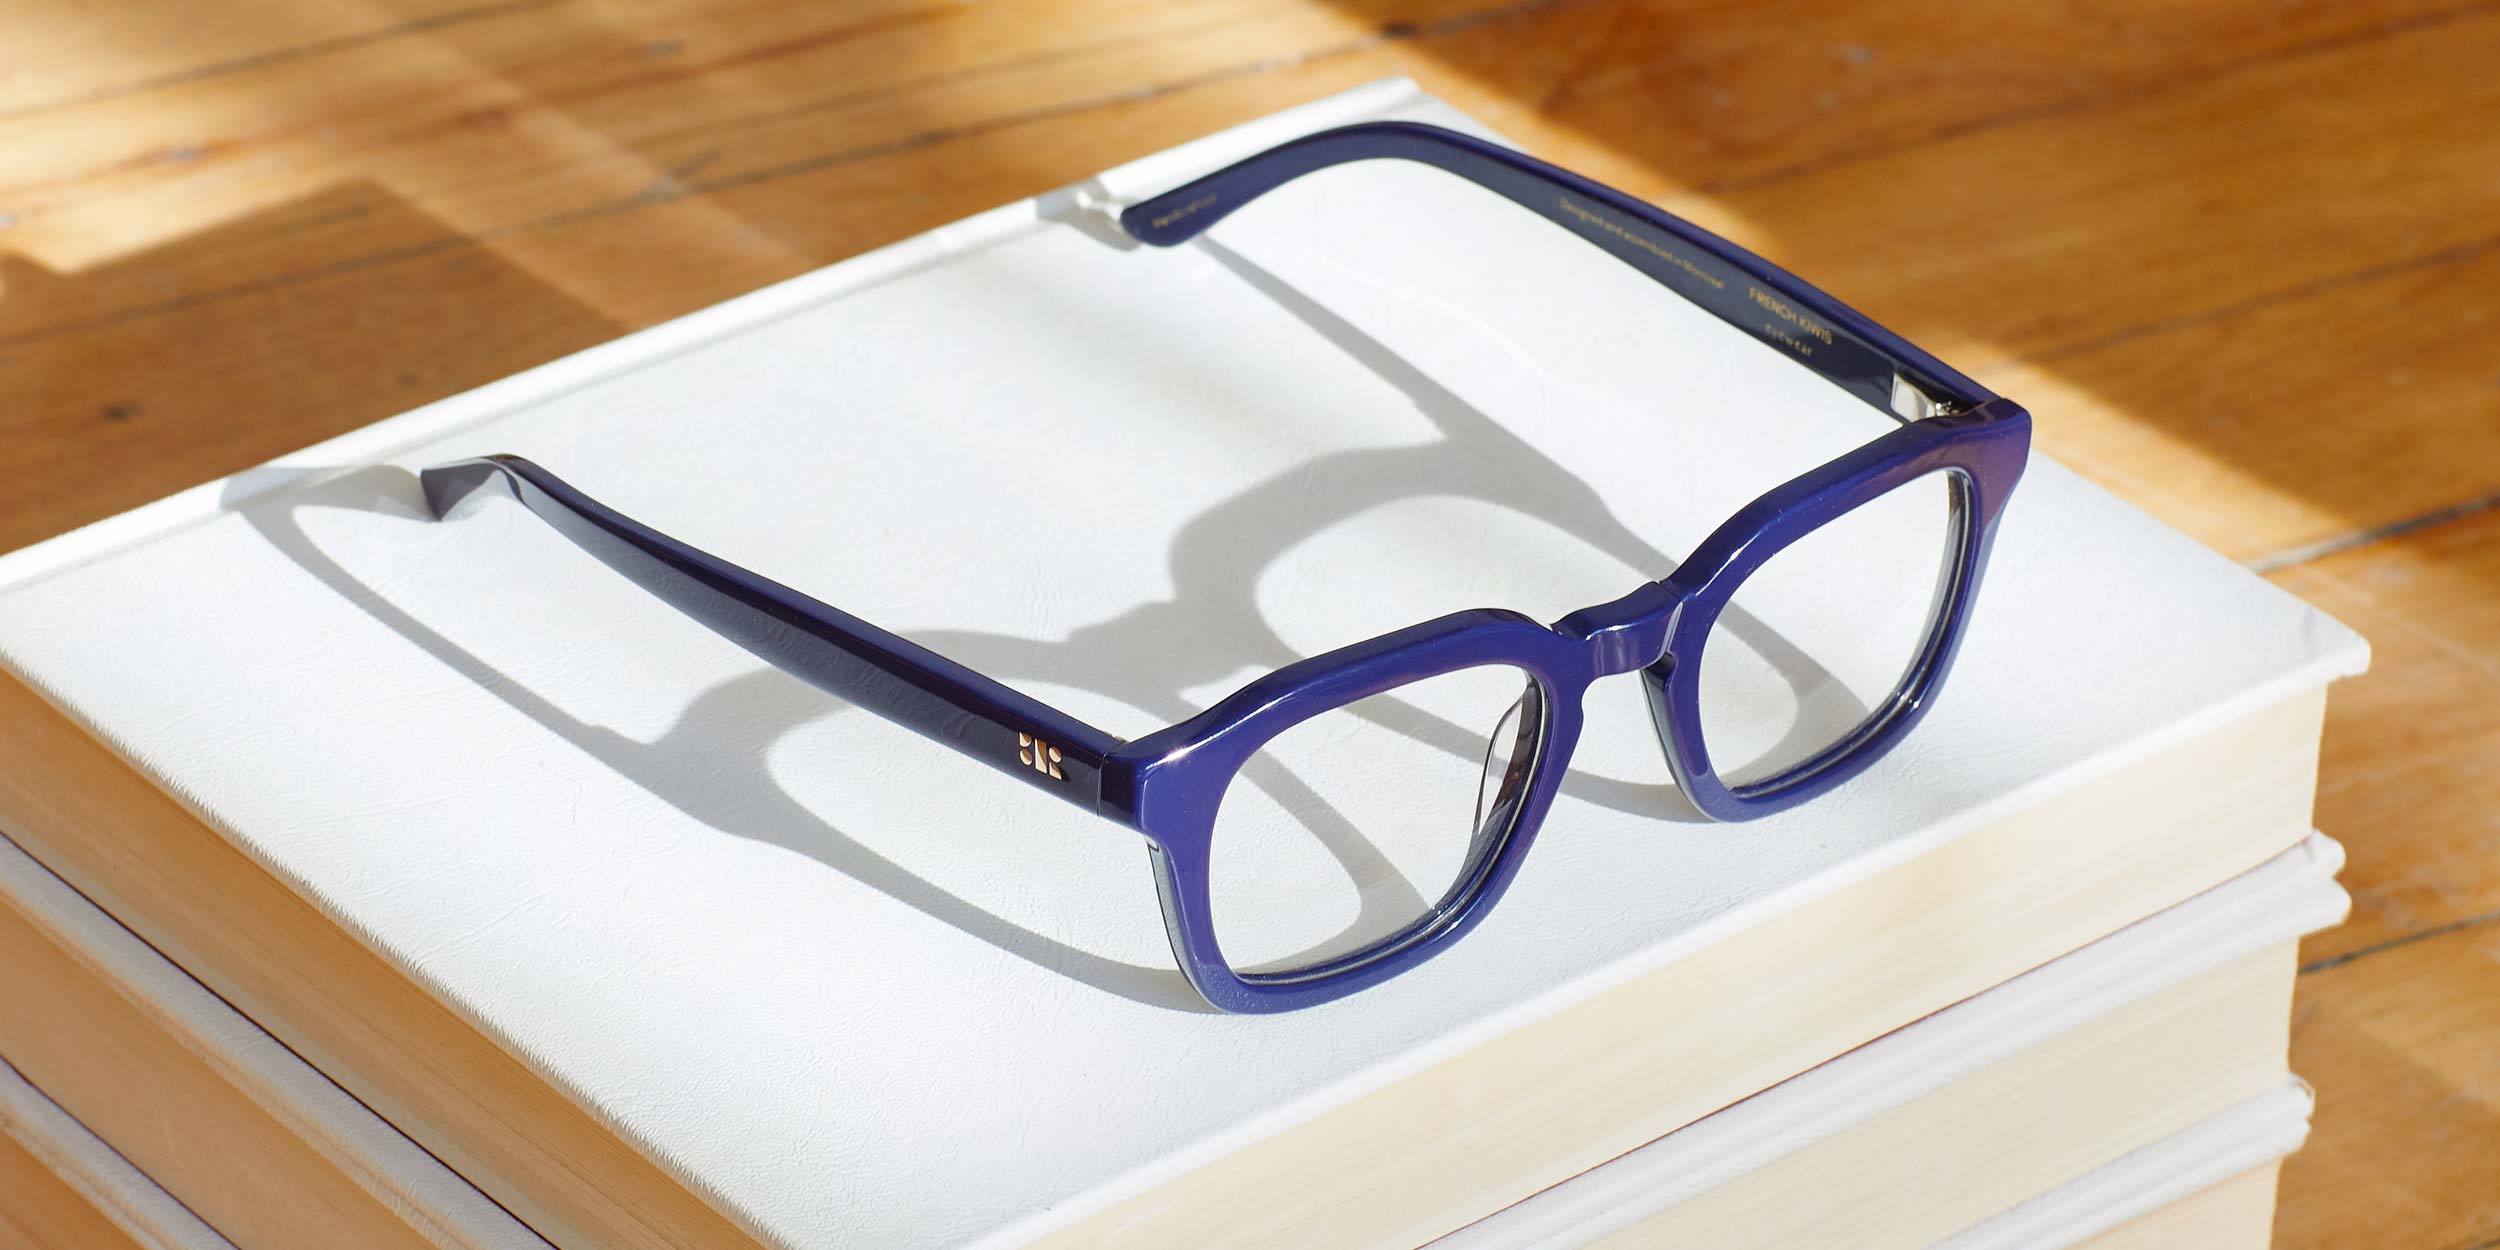 Photo Details of Oscar Clear Grey Reading Glasses in a room